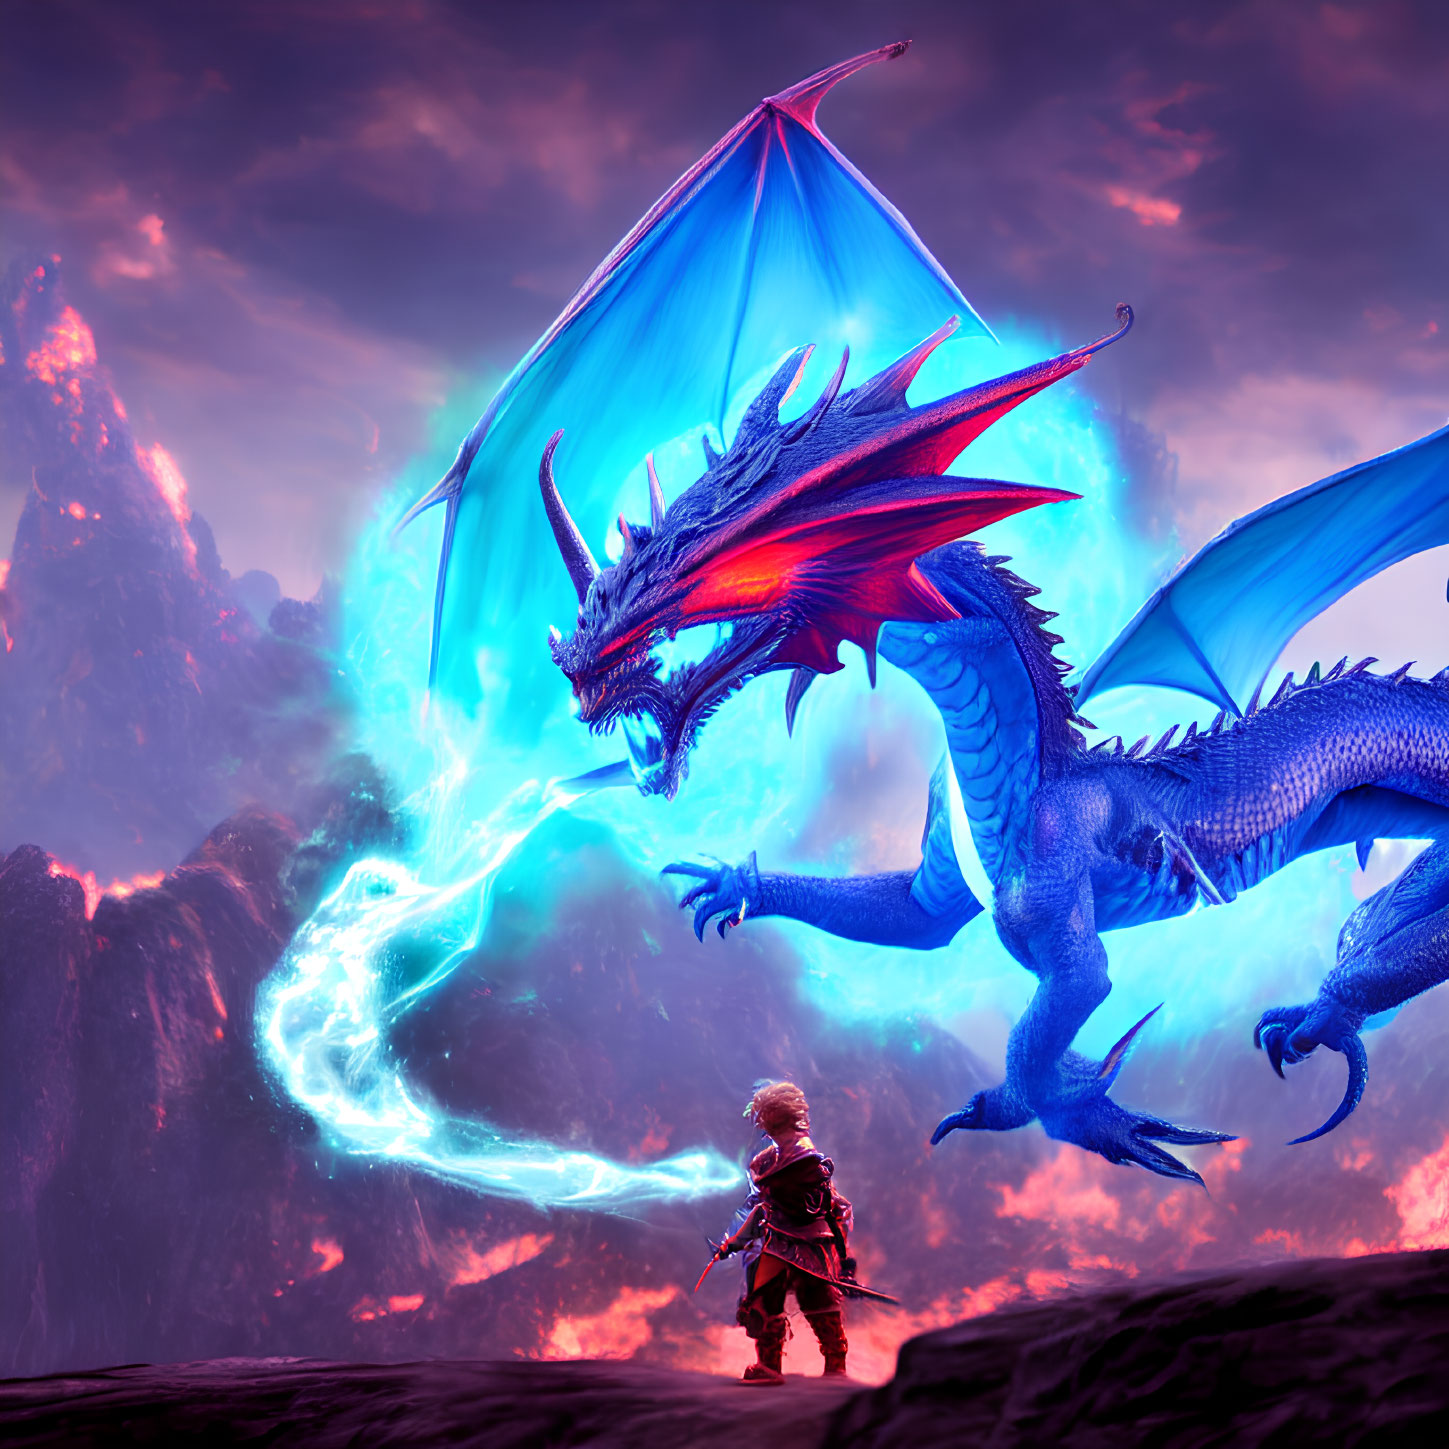 Warrior vs. Blue Dragon in Volcanic Landscape with Energy Orb